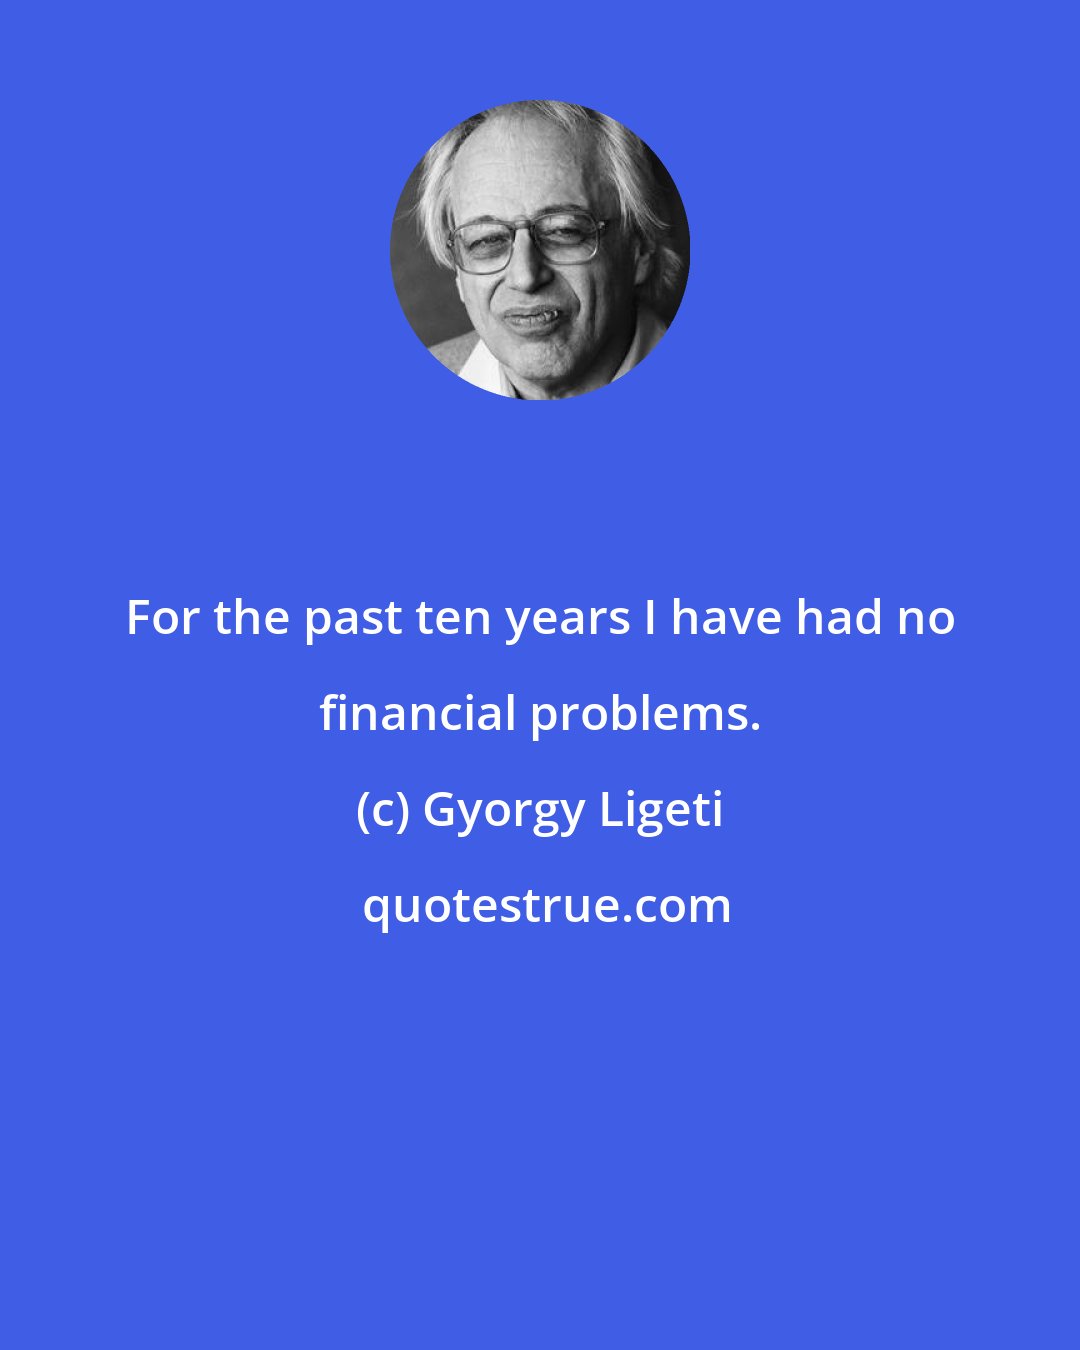 Gyorgy Ligeti: For the past ten years I have had no financial problems.